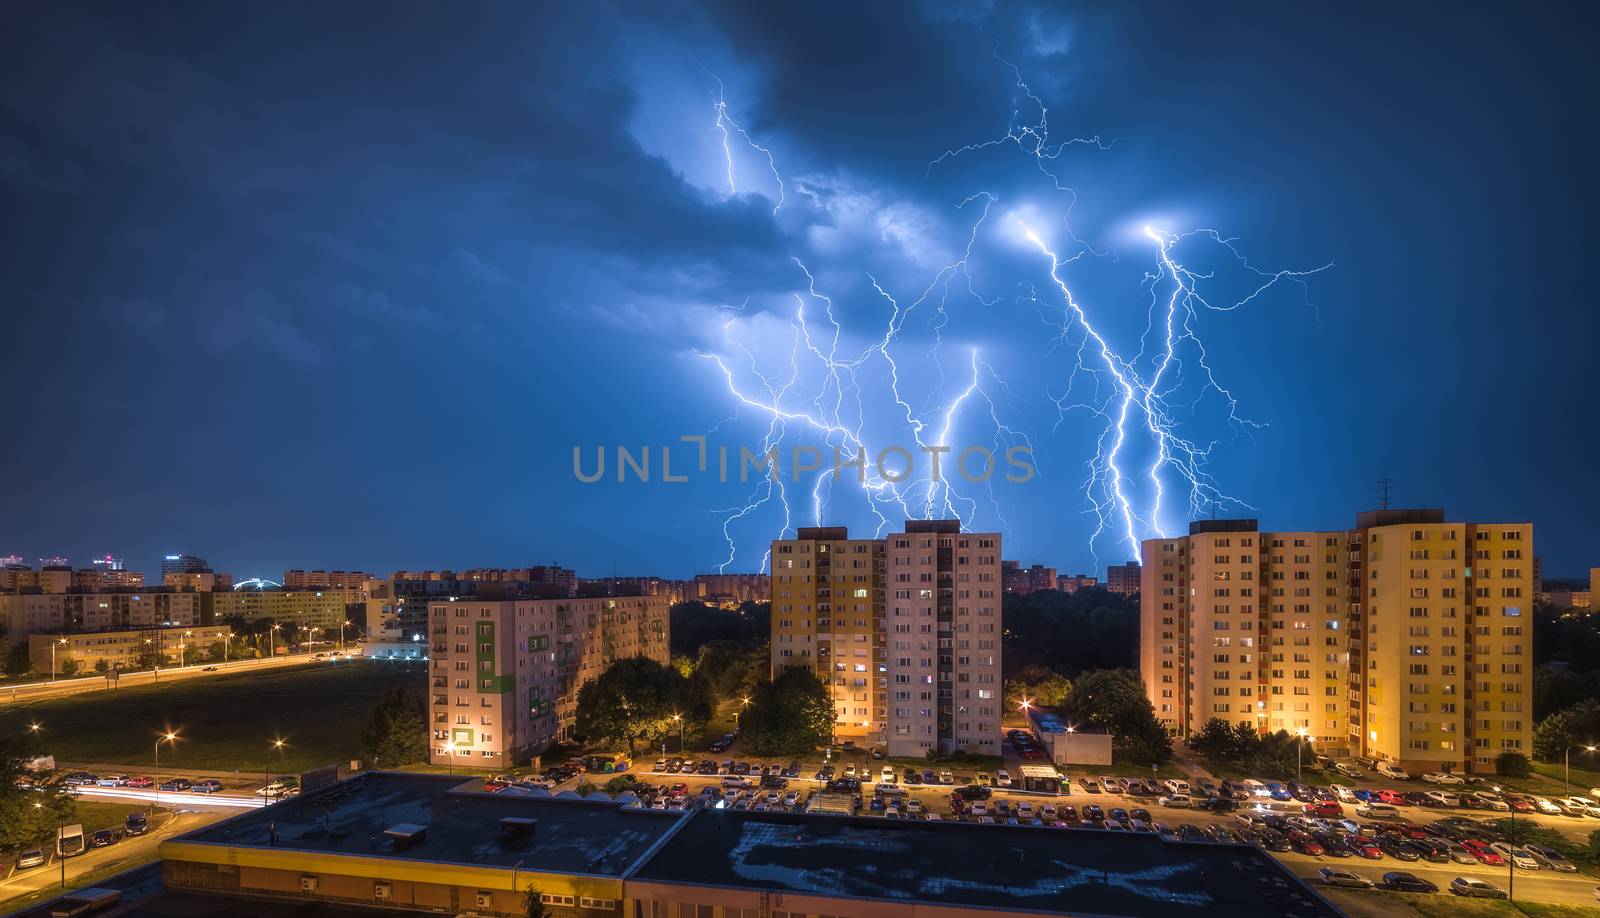 Lightnings Over Housing Estate by Kayco